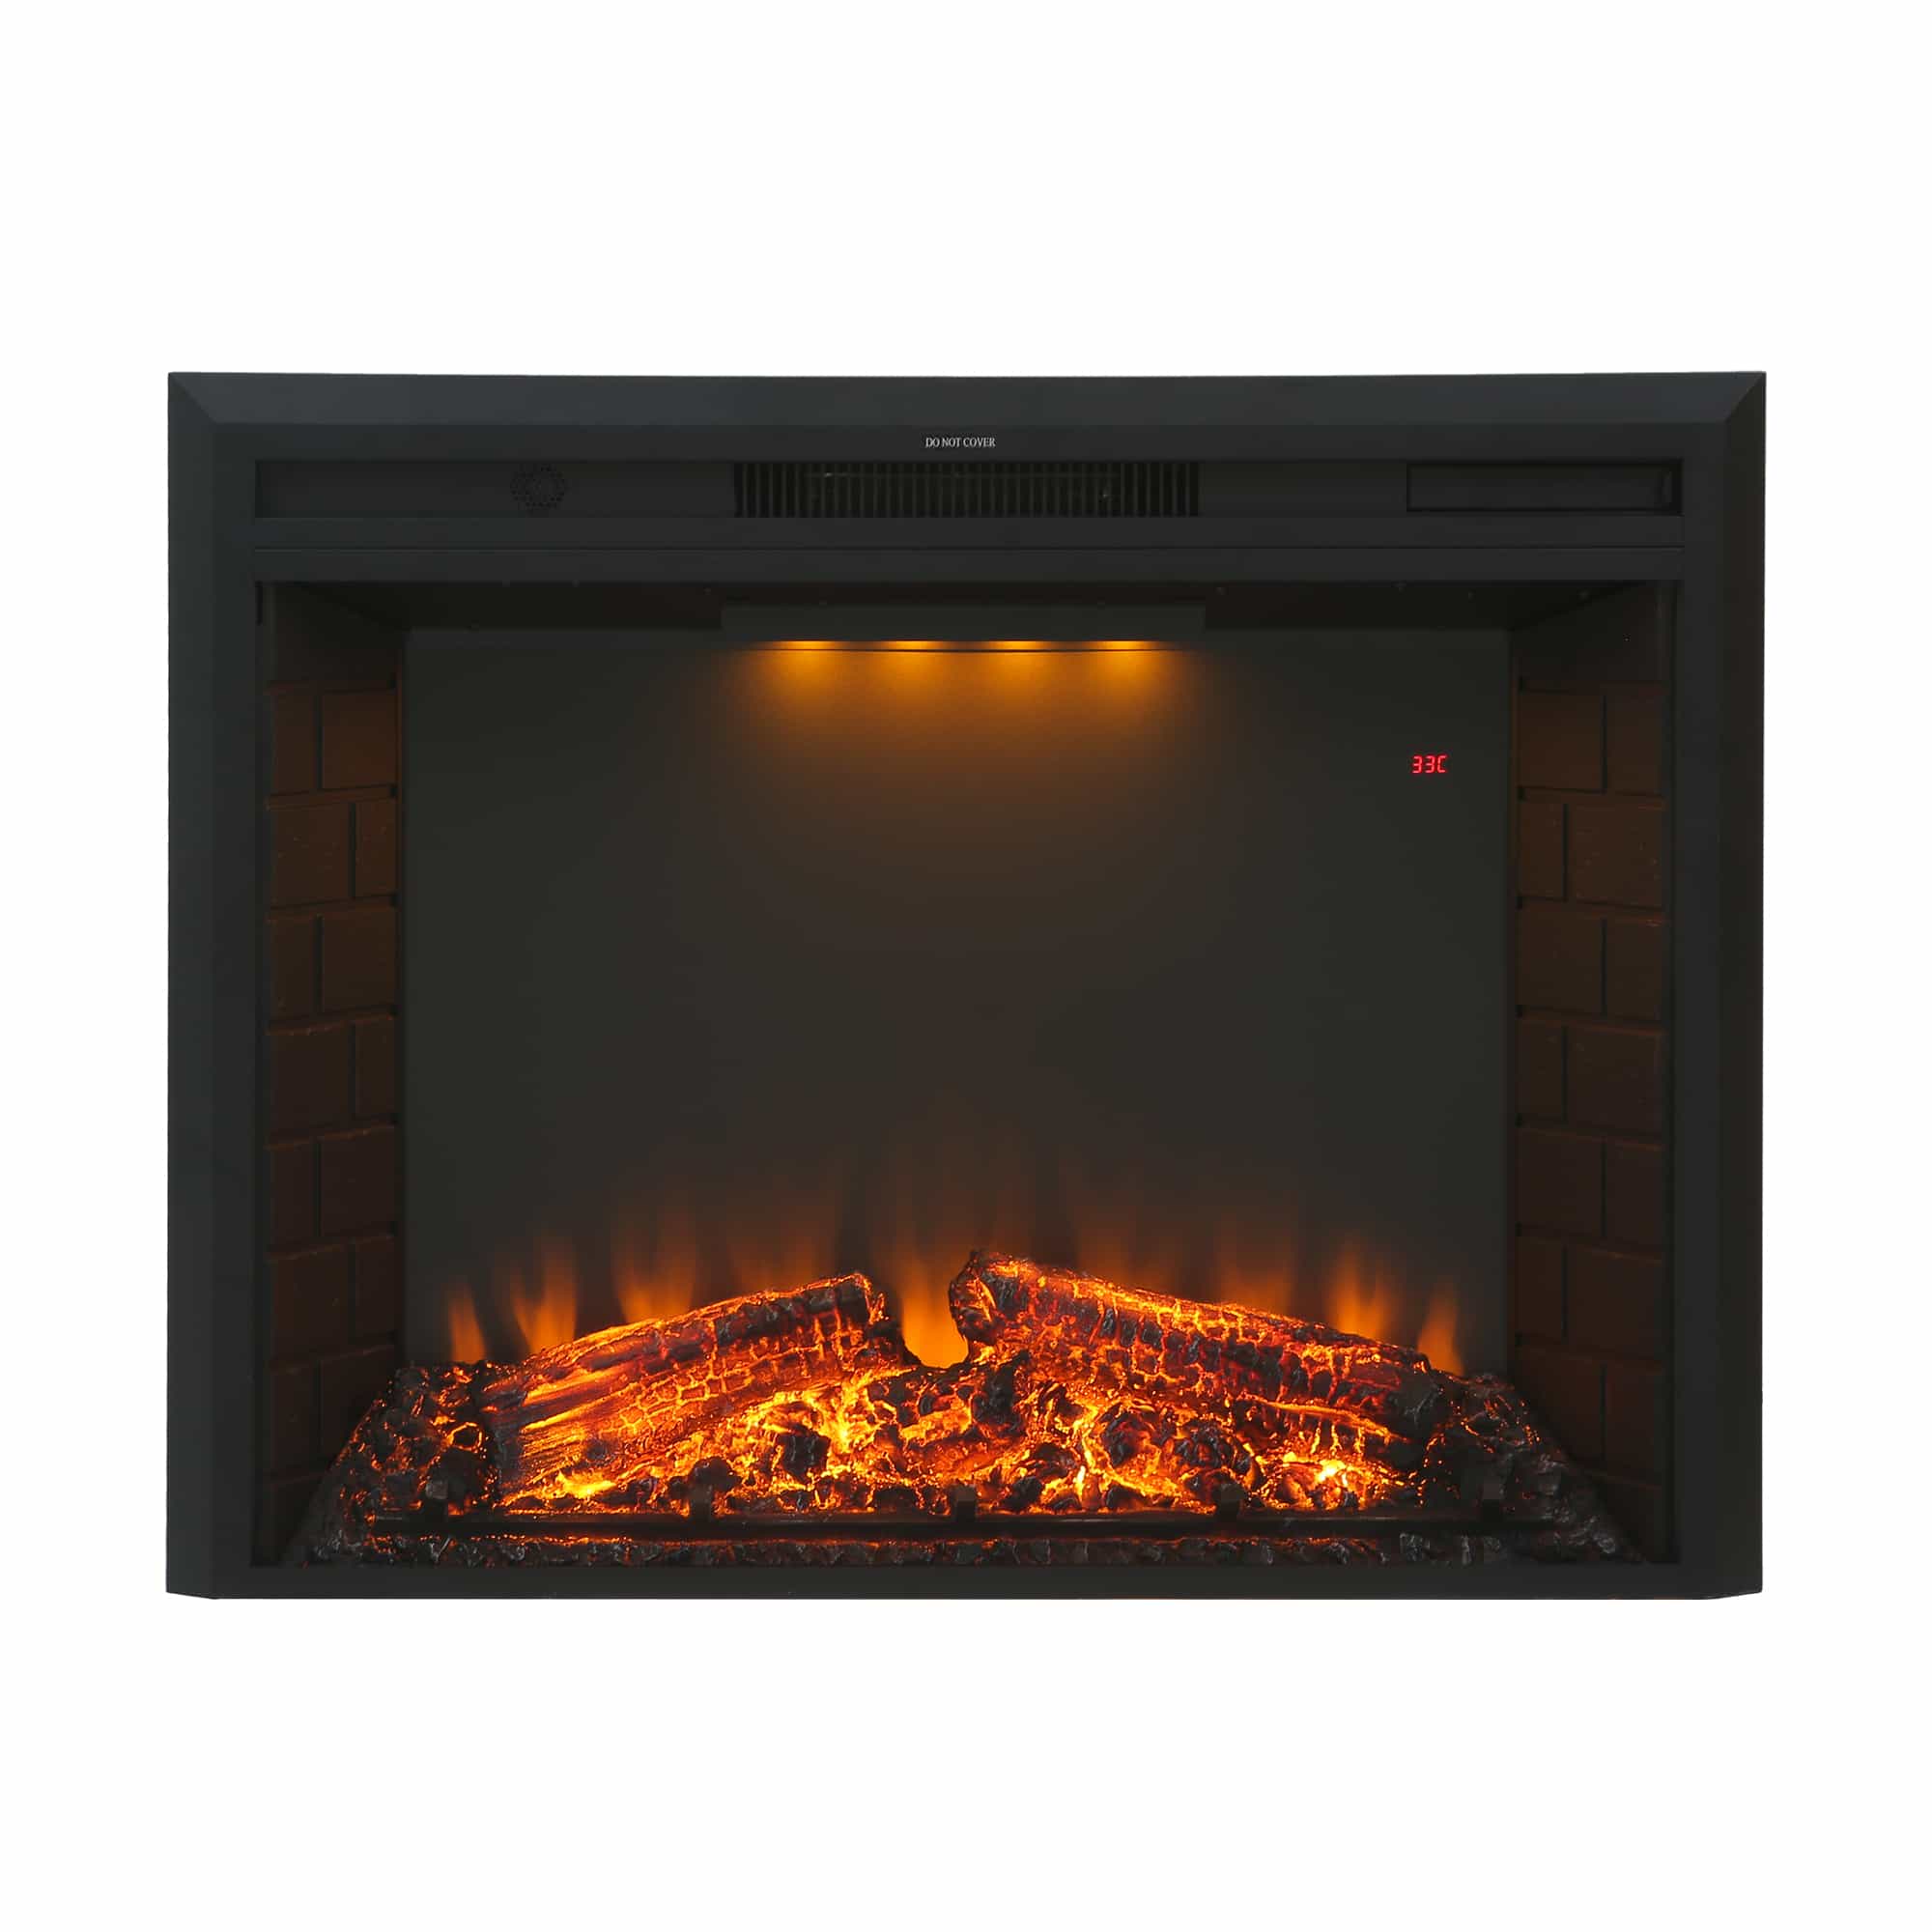 CASAINC 30.5 Inch LED Electric Fireplace Insert in Black